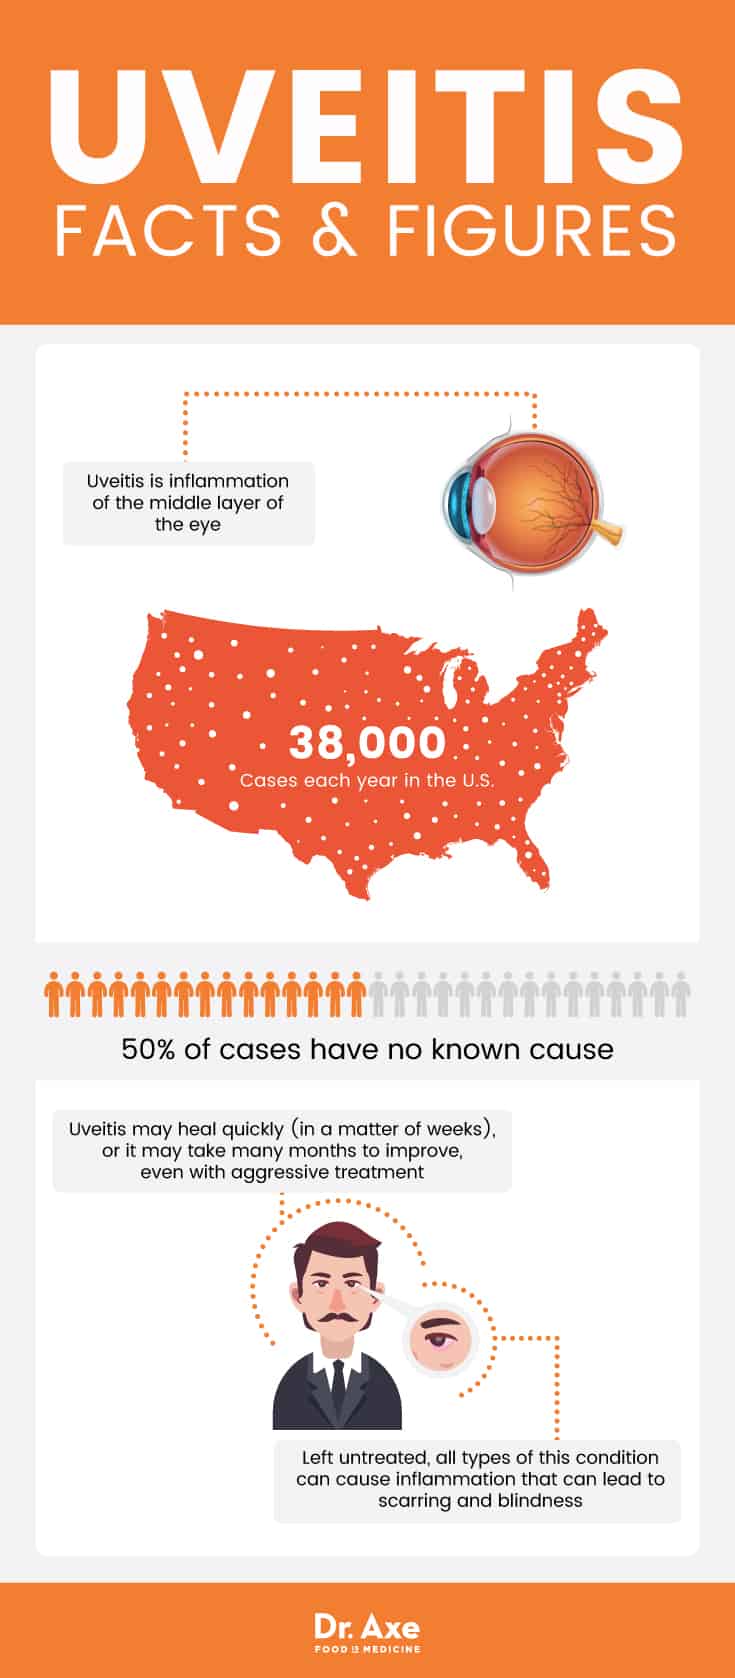 Uveitis facts & figures - Dr. Axe